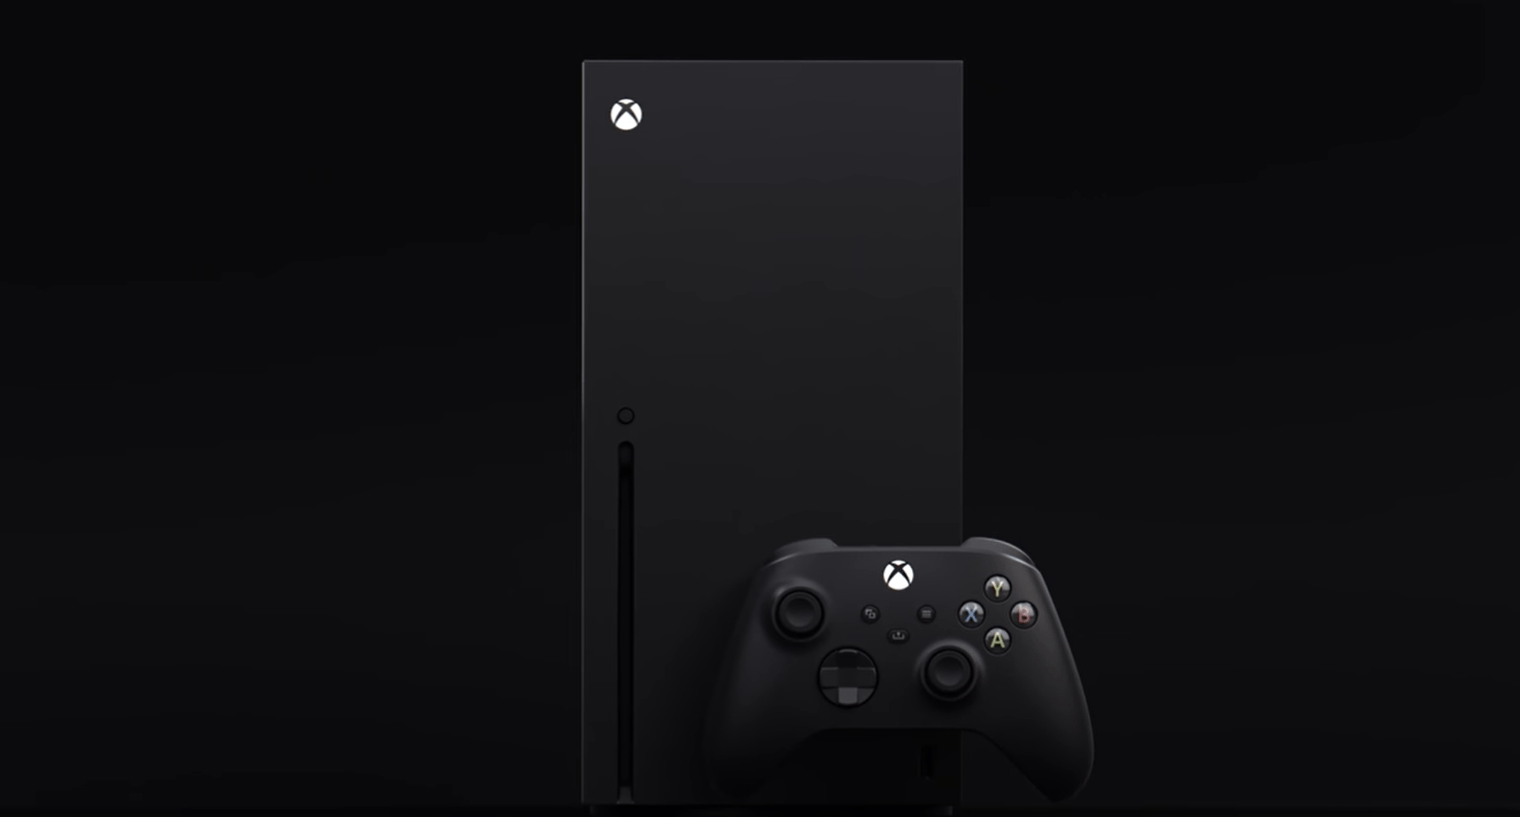 Microsoft Reveals Dozens Of Wild Xbox Series X Games For Next-Gen Console During COVID-19 Press Conference